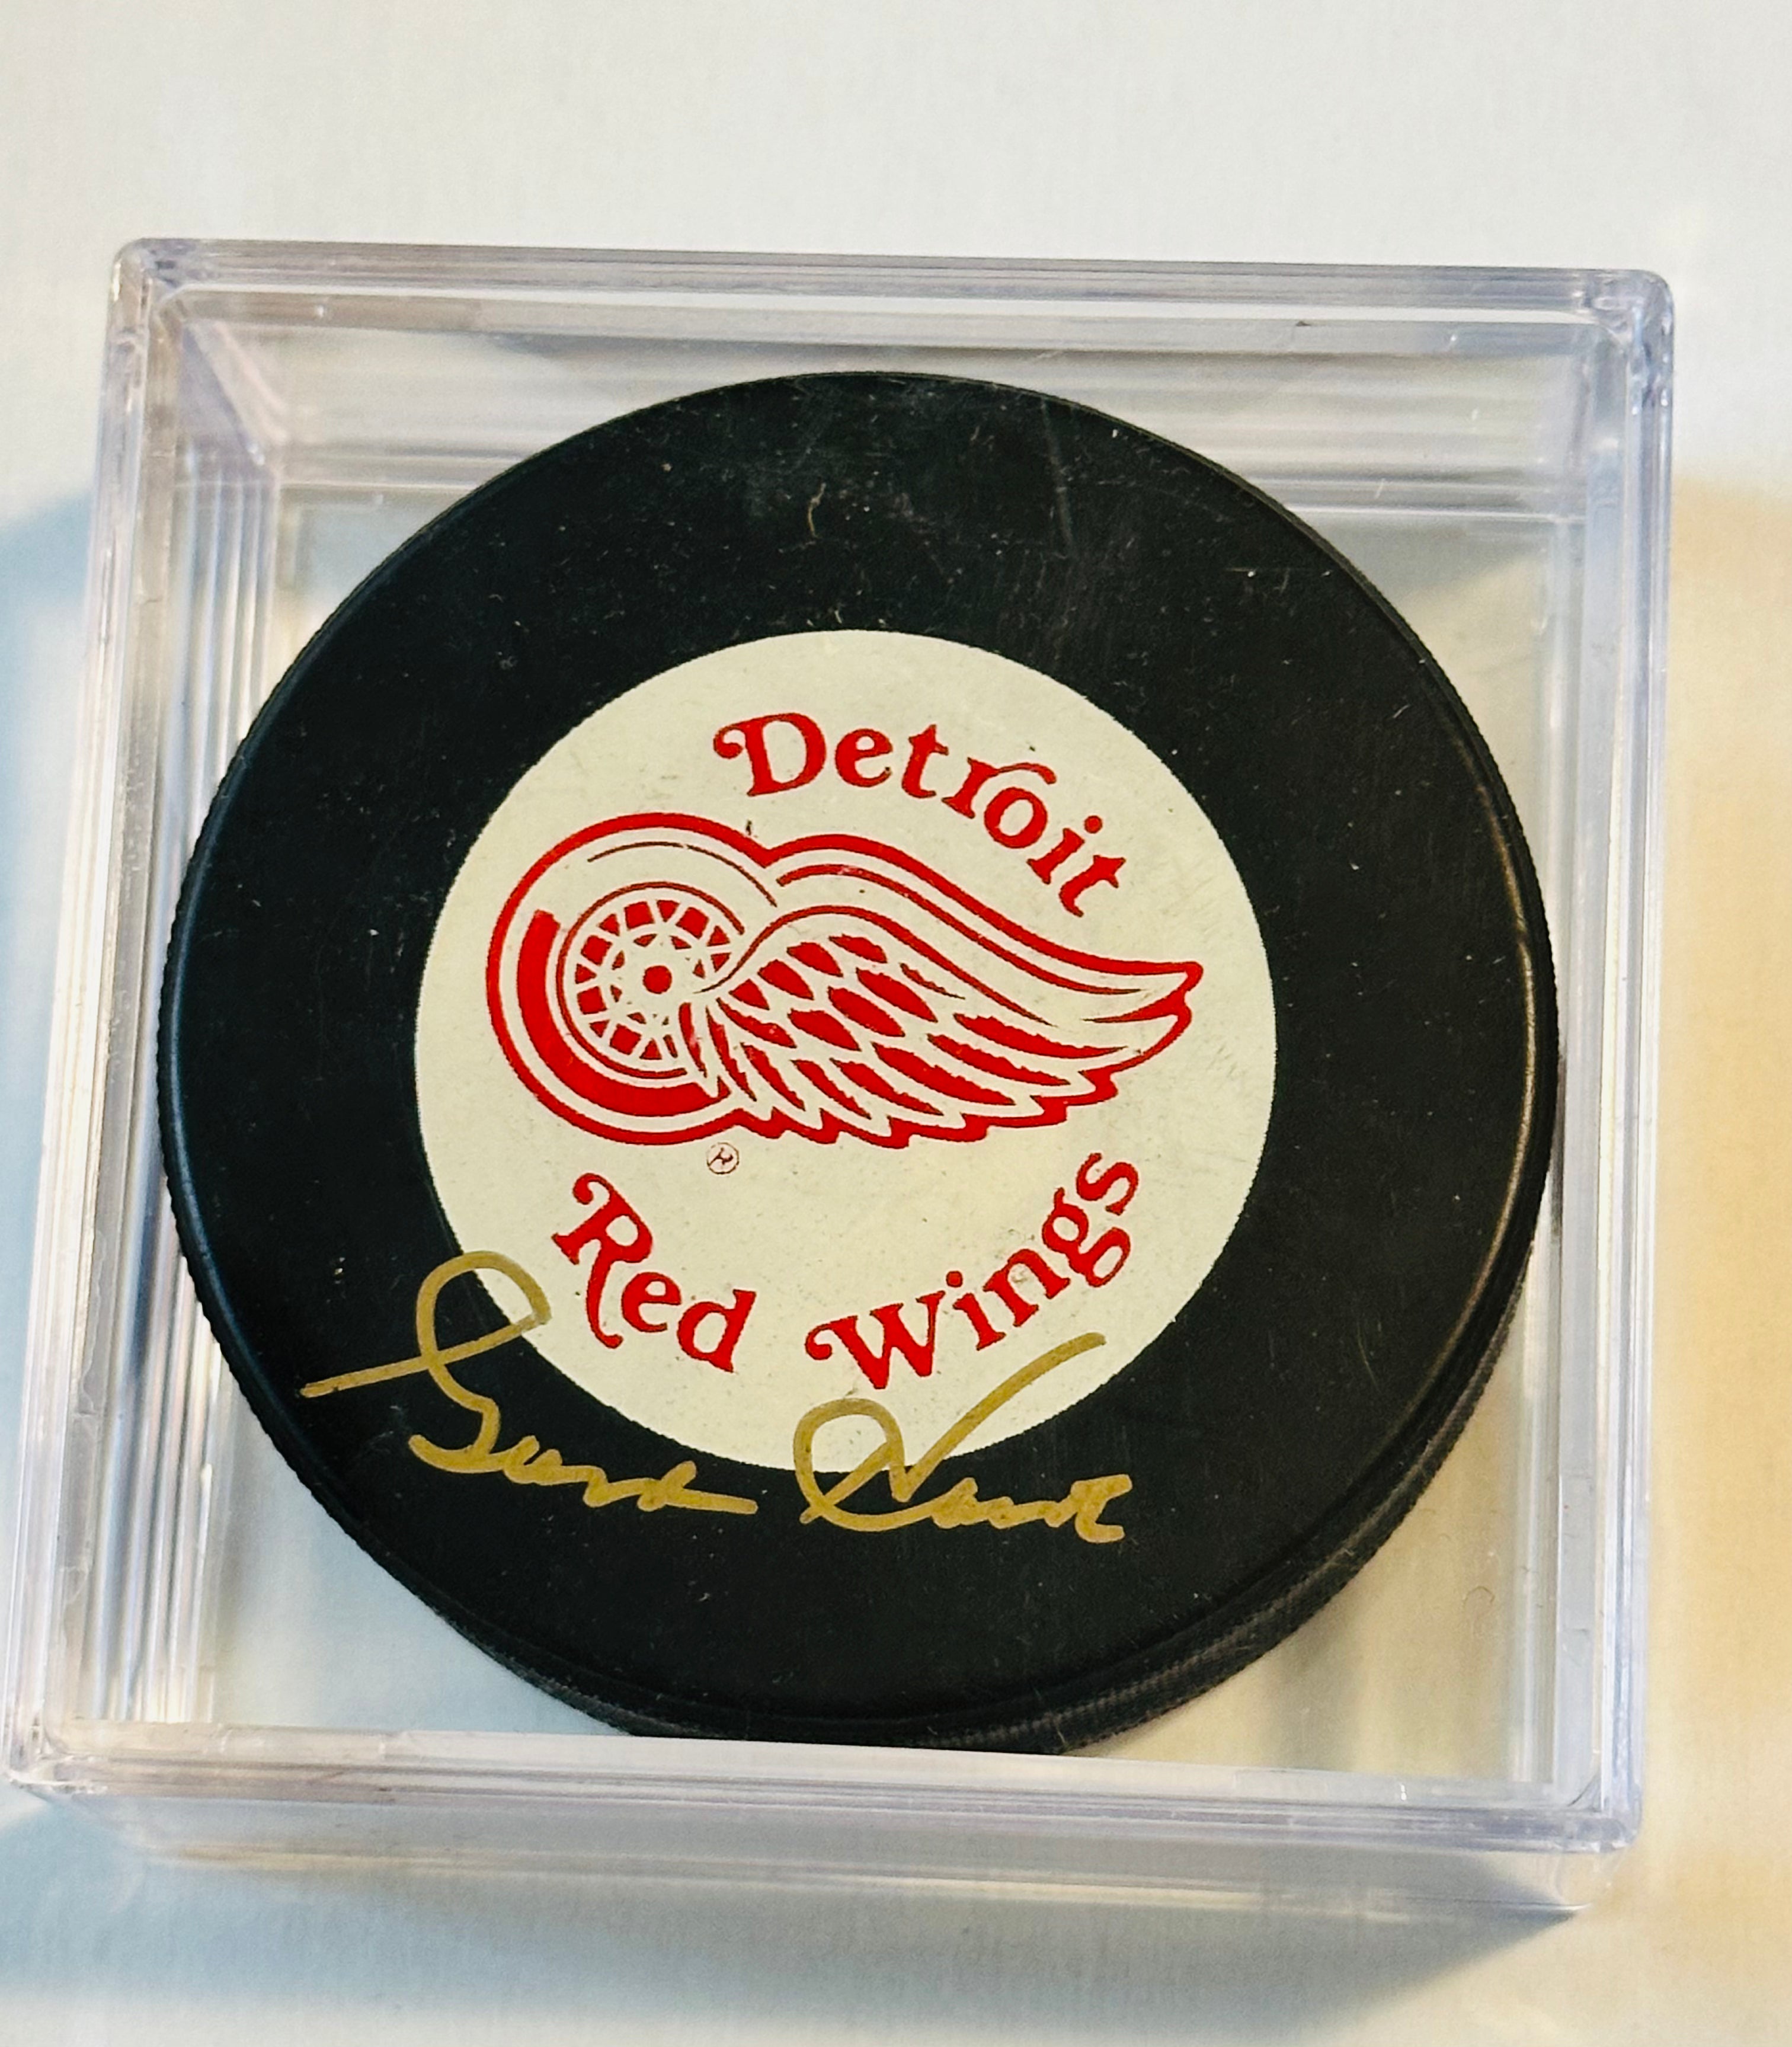 Gordie Howe signed in person hockey puck with holder and case with COA